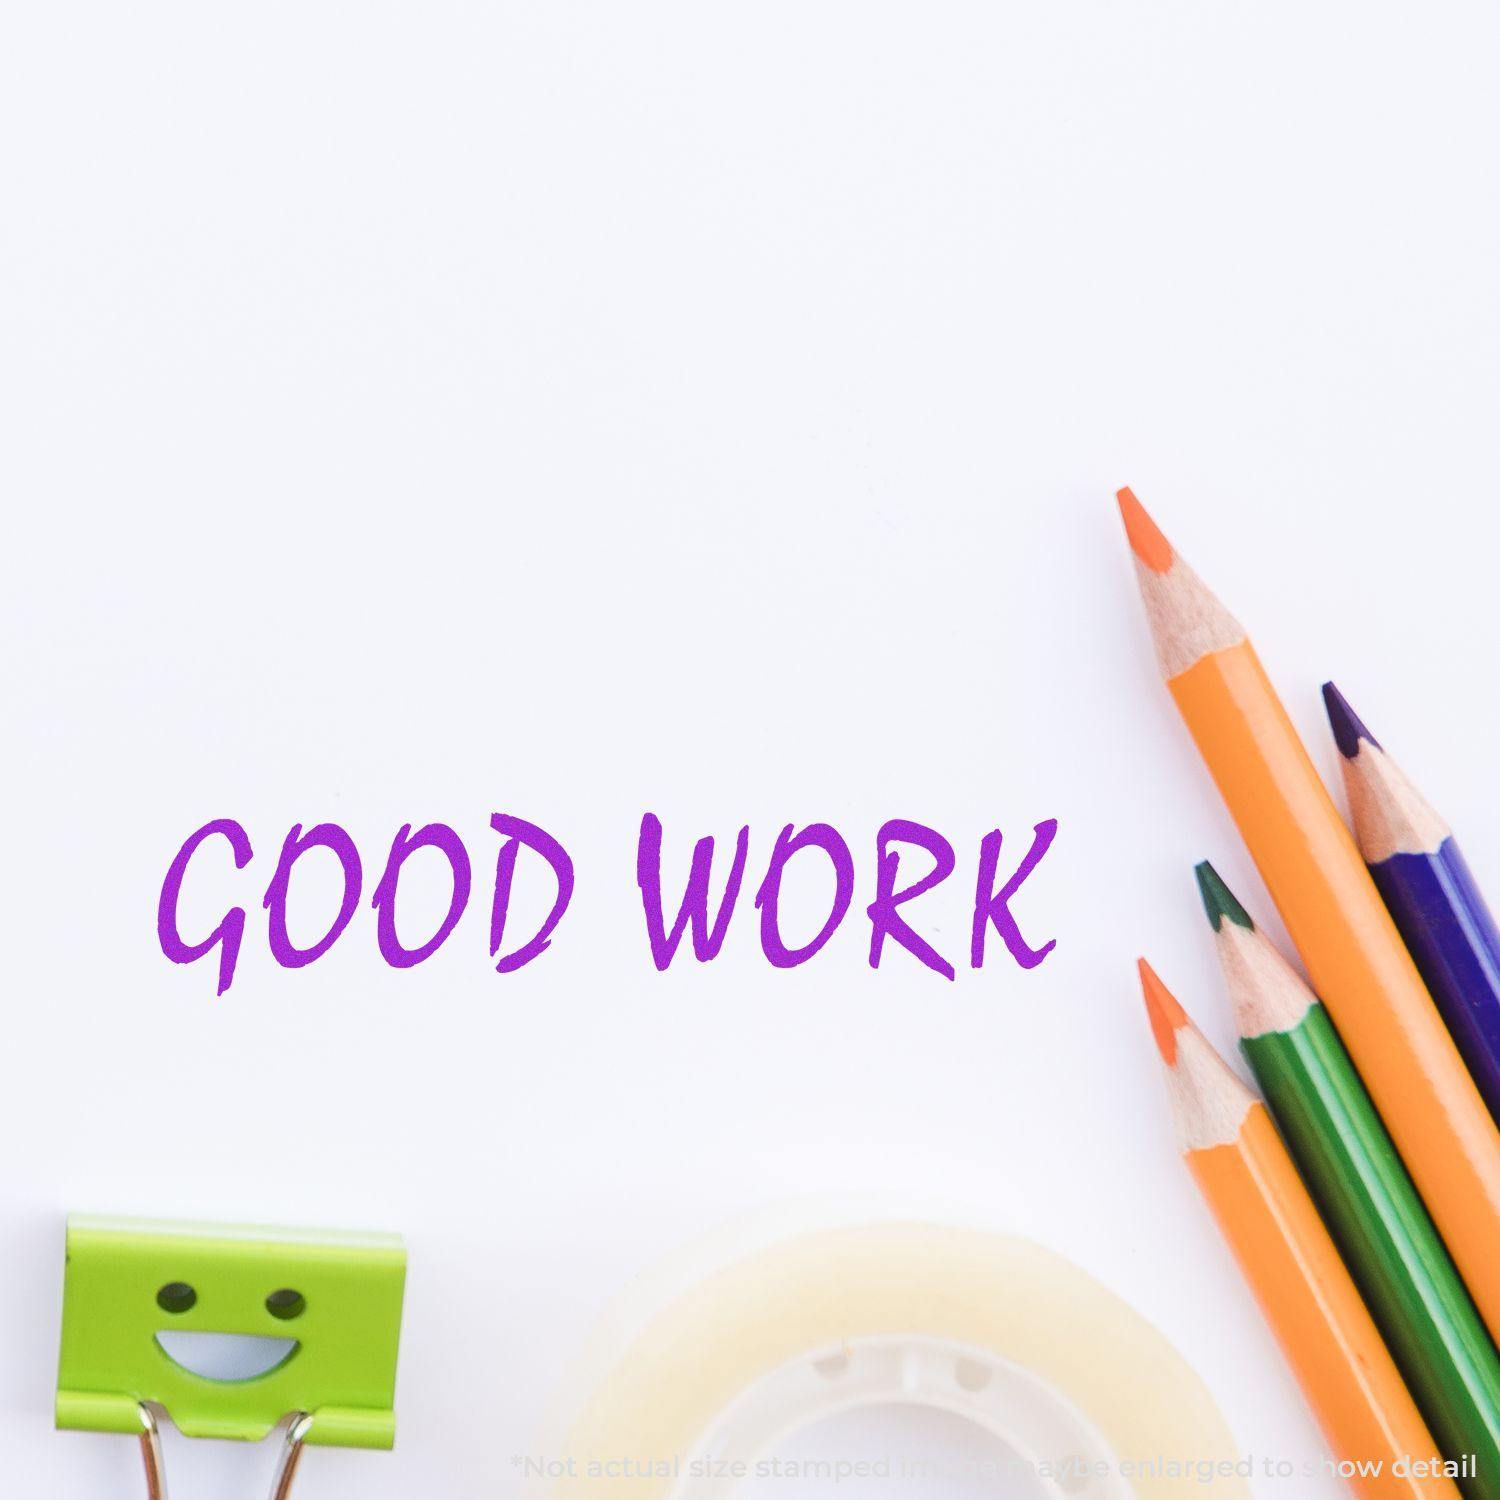 A self-inking stamp with a stamped image showing how the text "GOOD WORK" in a unique large bold font is displayed by it.